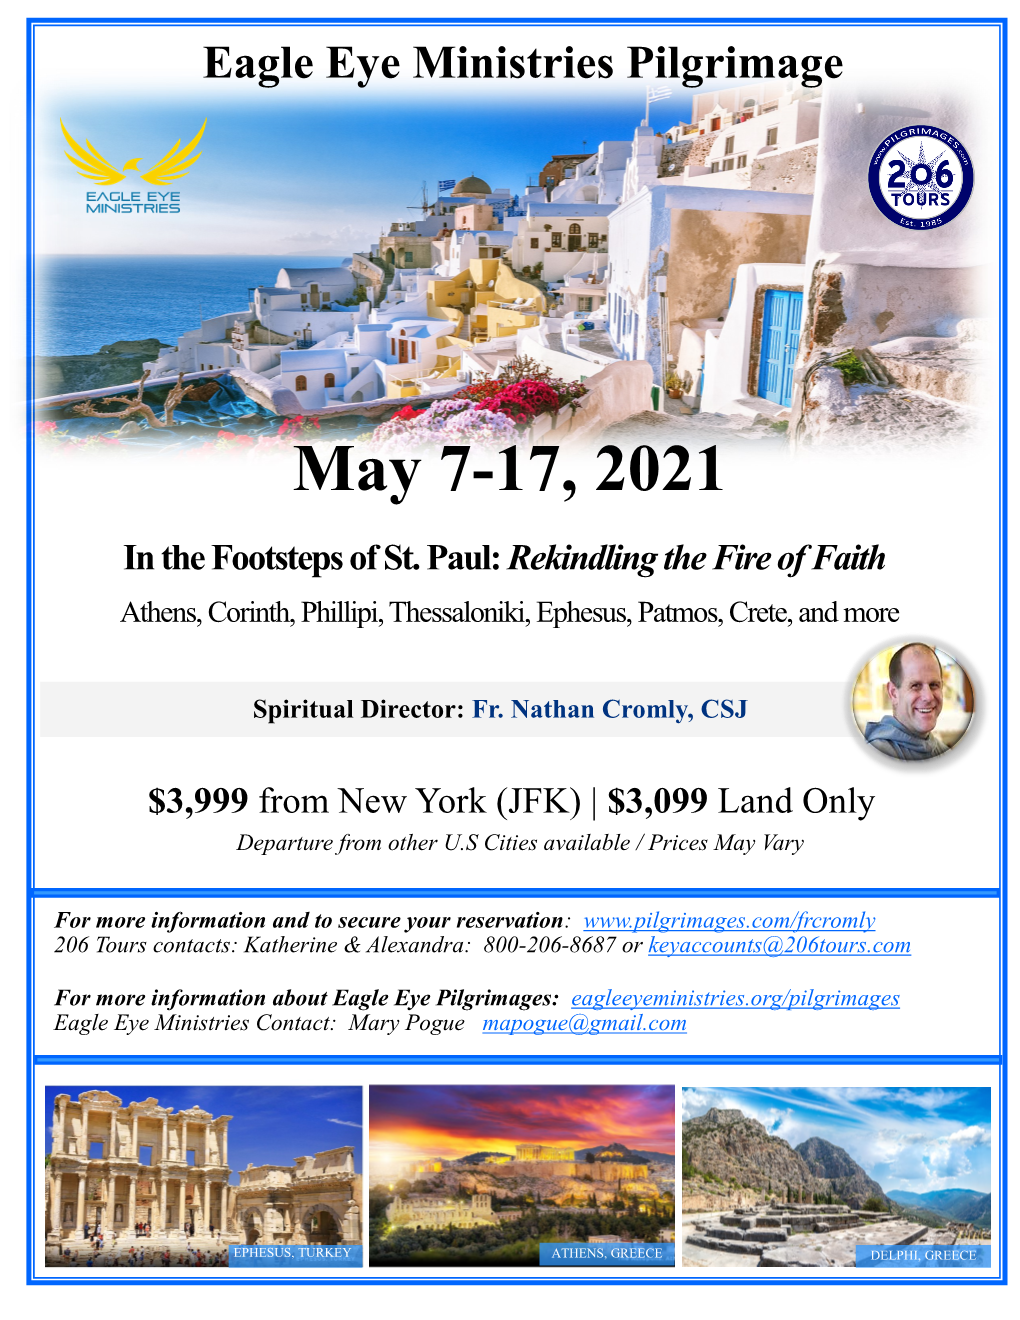 May 7-17, 2021 in the Footsteps of St